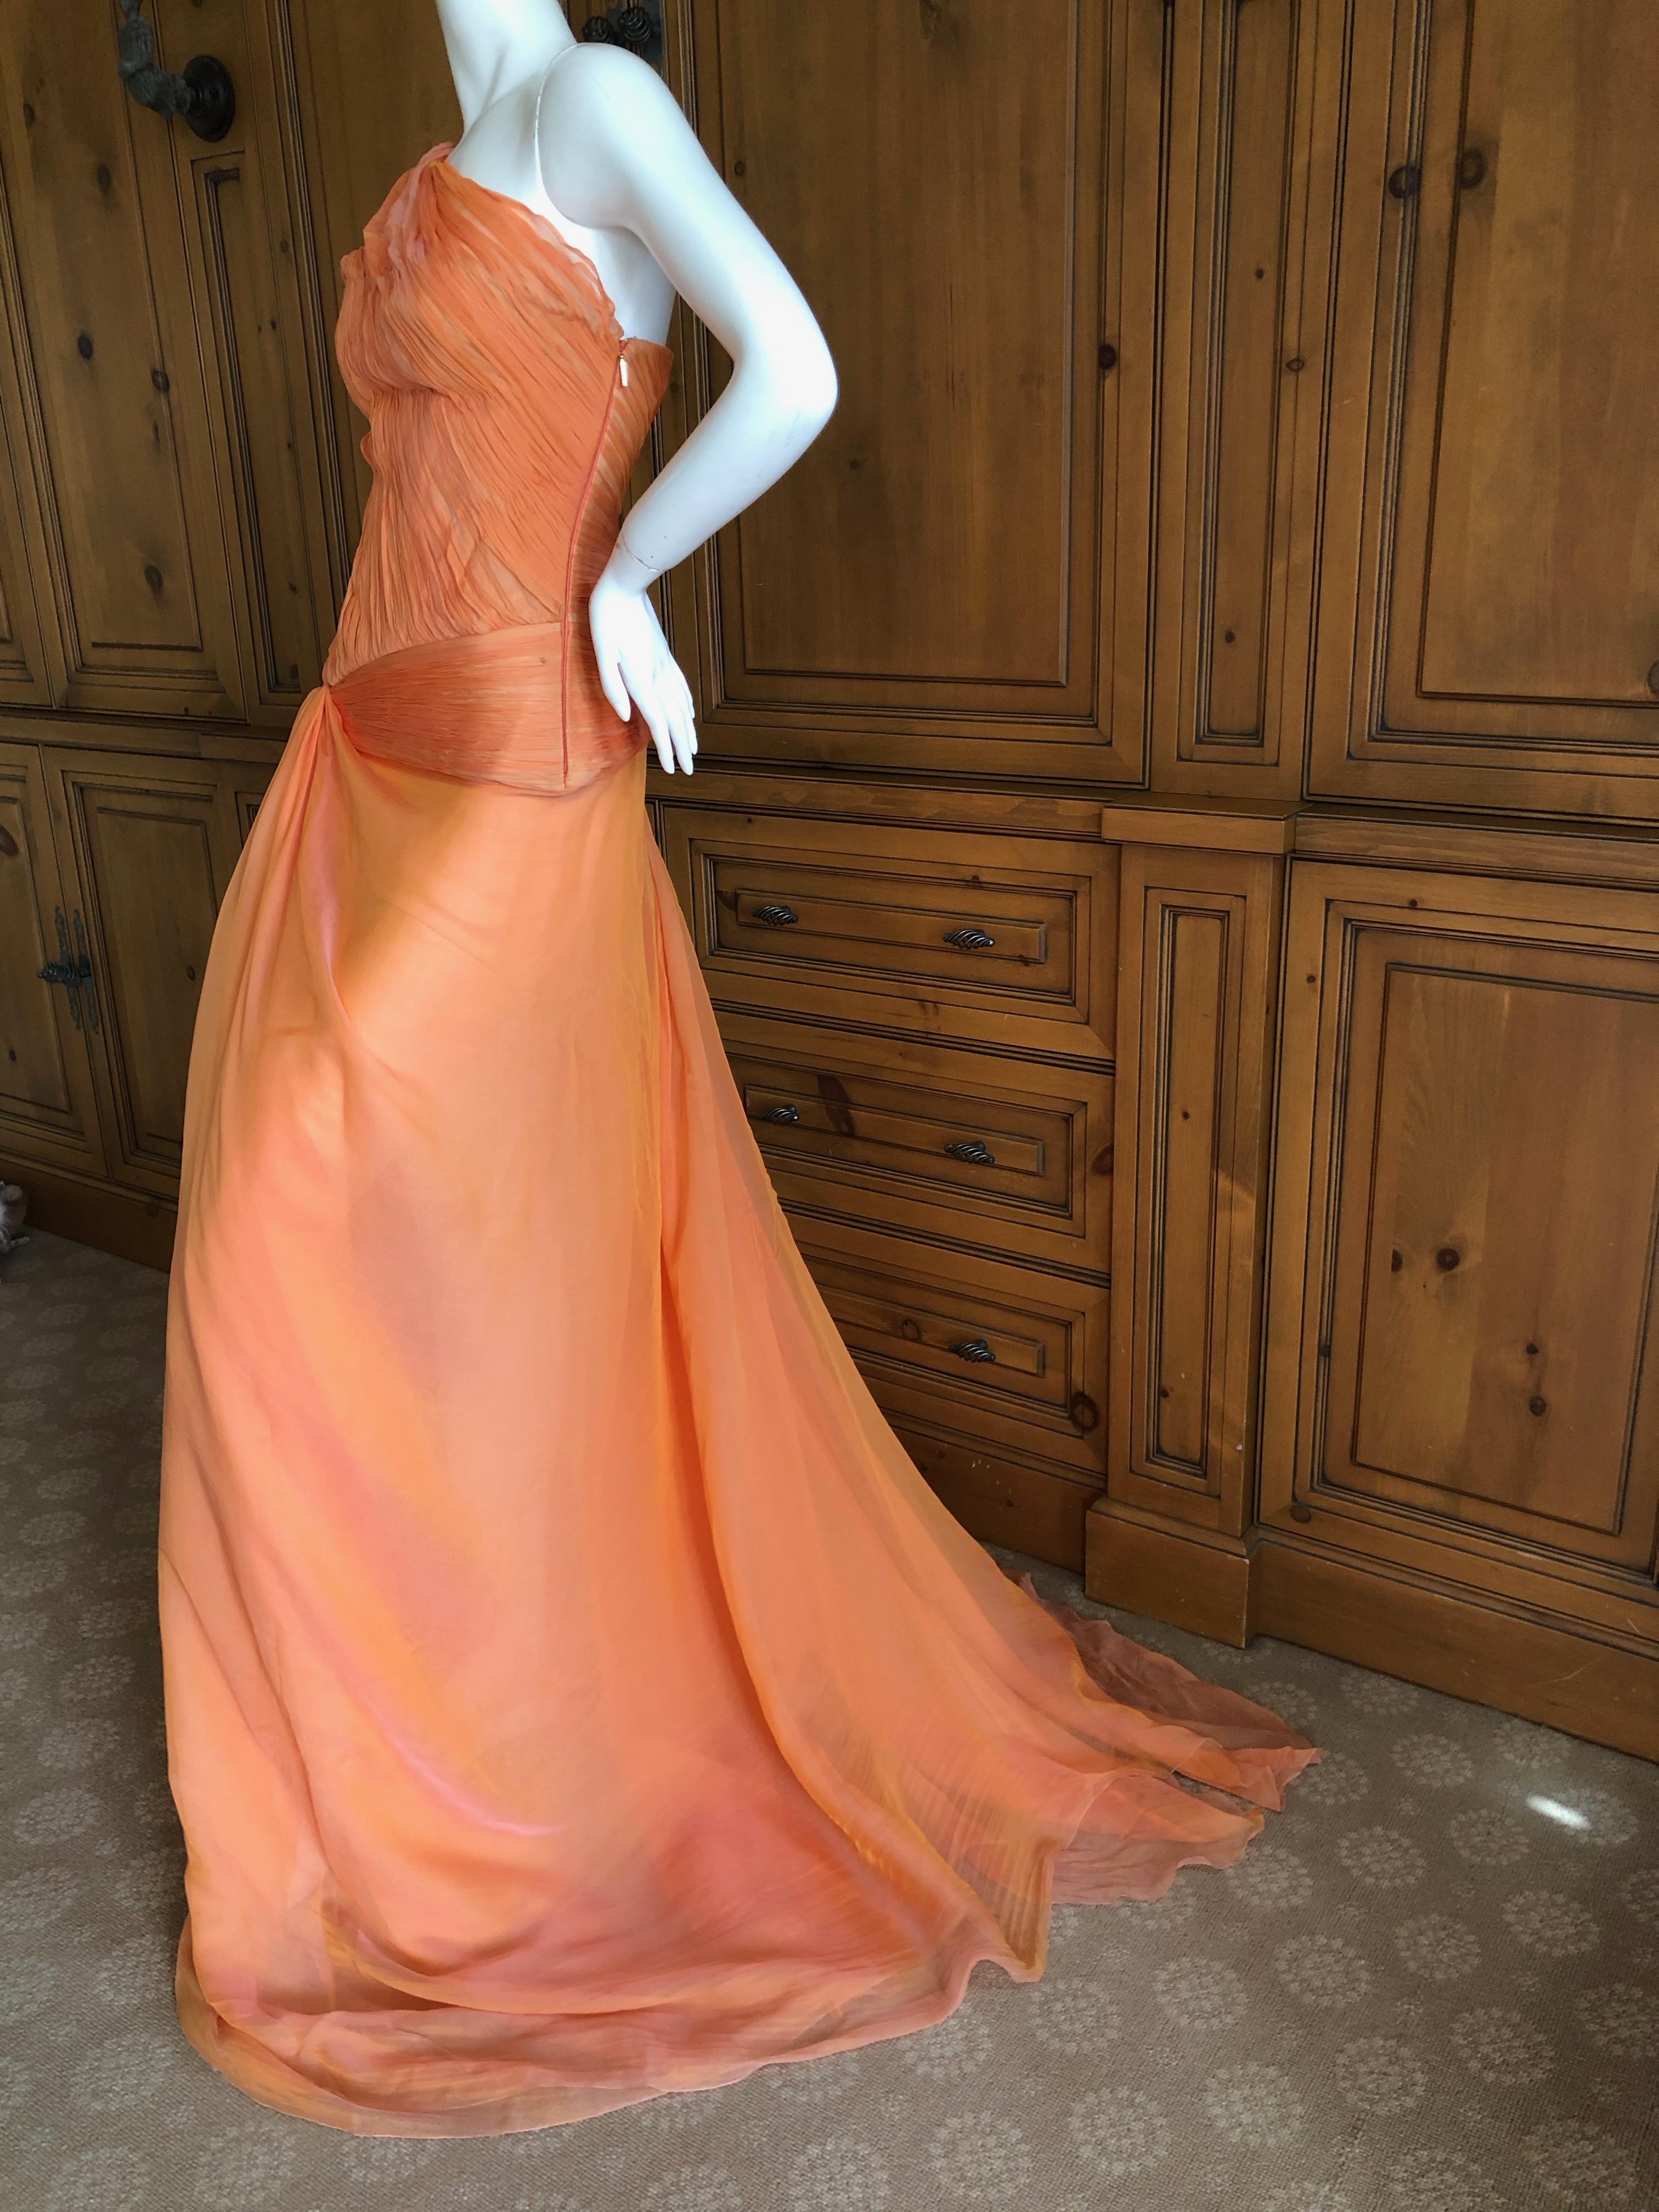 Roberto Cavalli Vintage Iridescent Orange Silk Chiffon One Shoulder Goddess Gown.
This is so pretty
There are bra underwires and an inner corset, which don't work well on my mannequin
So sweet and sexy.
Size 38
 Bust 34